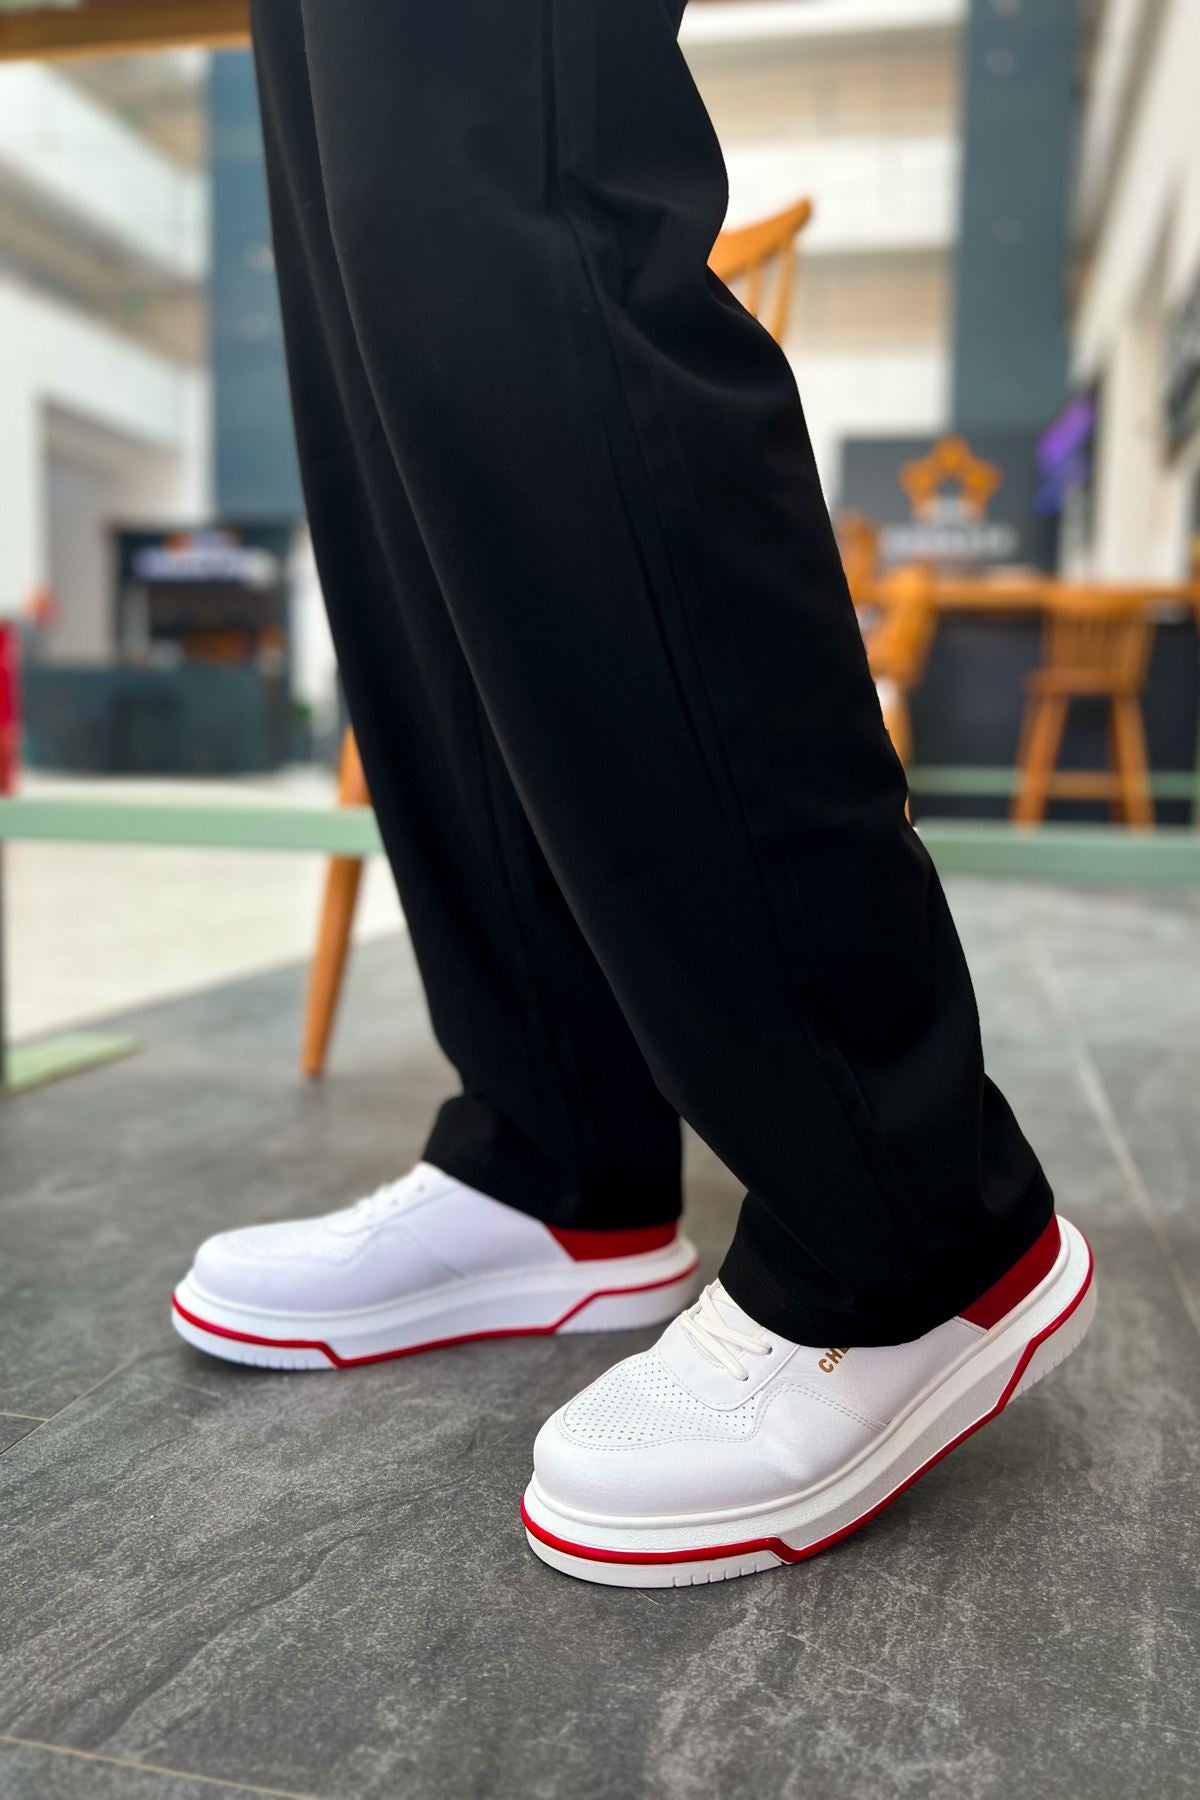 CH075 Men's Unisex White-Red Casual Sneaker Sports Shoes - STREETMODE ™